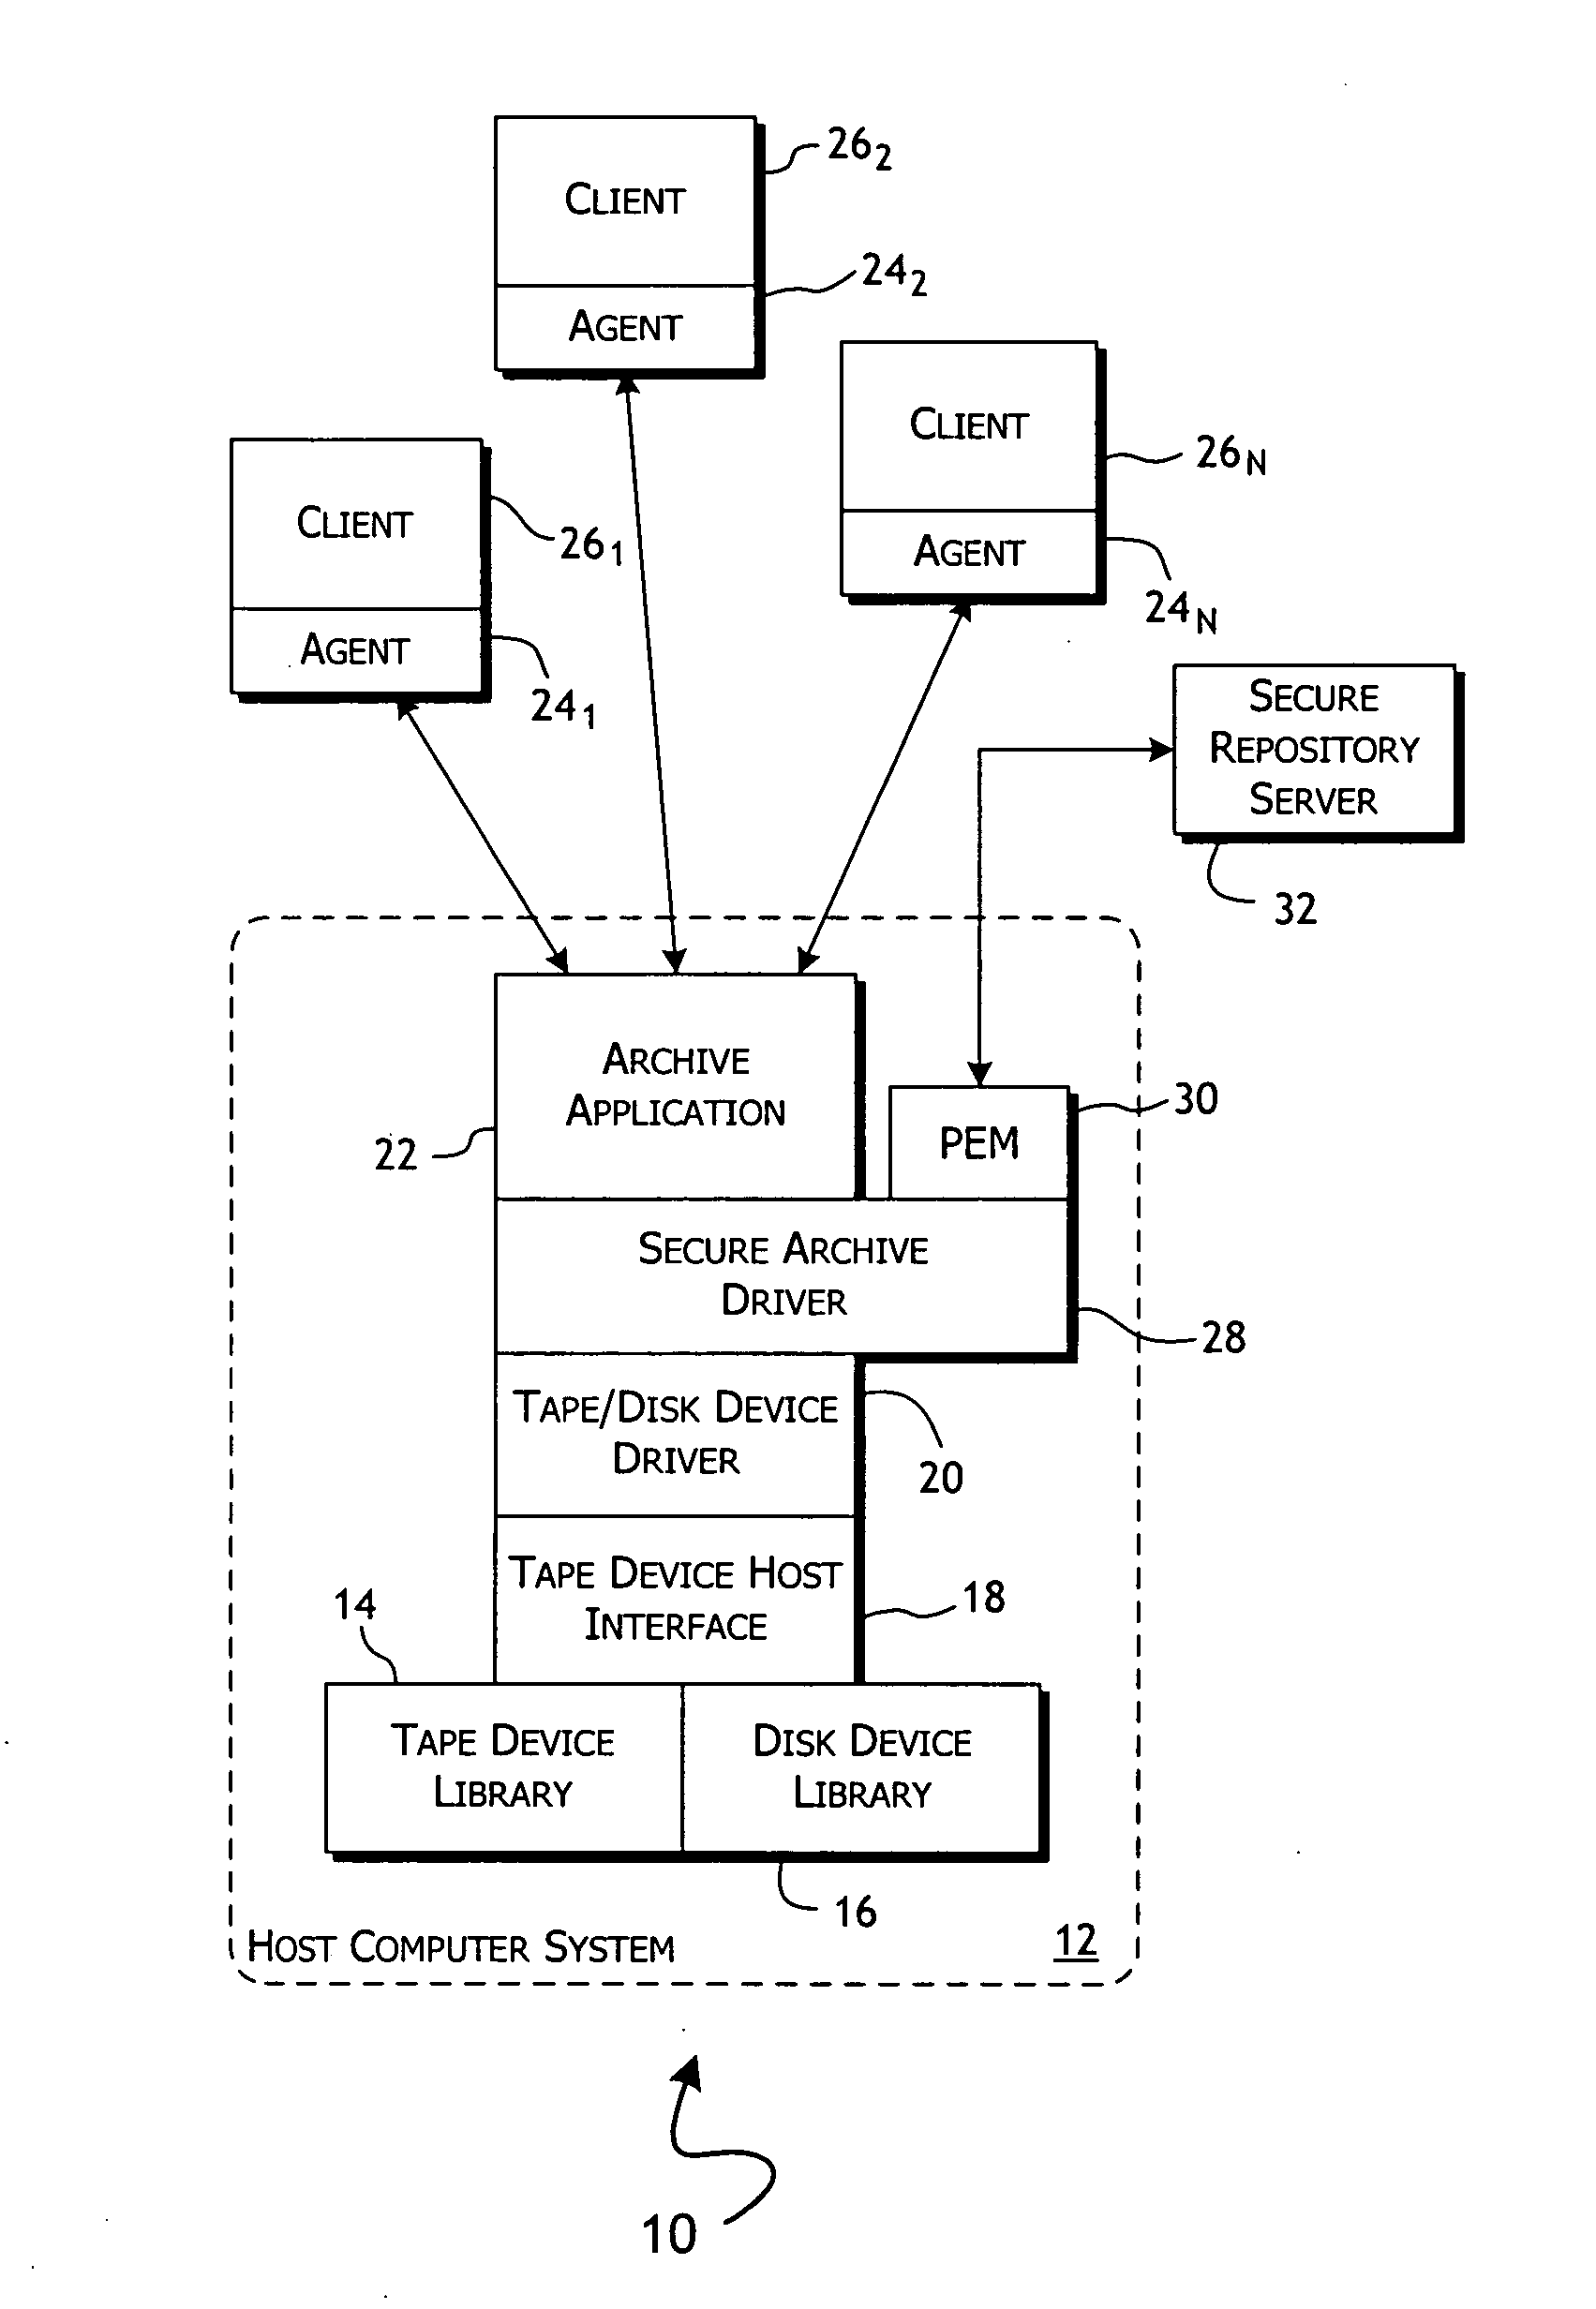 System and methods for secure digital data archiving and access auditing